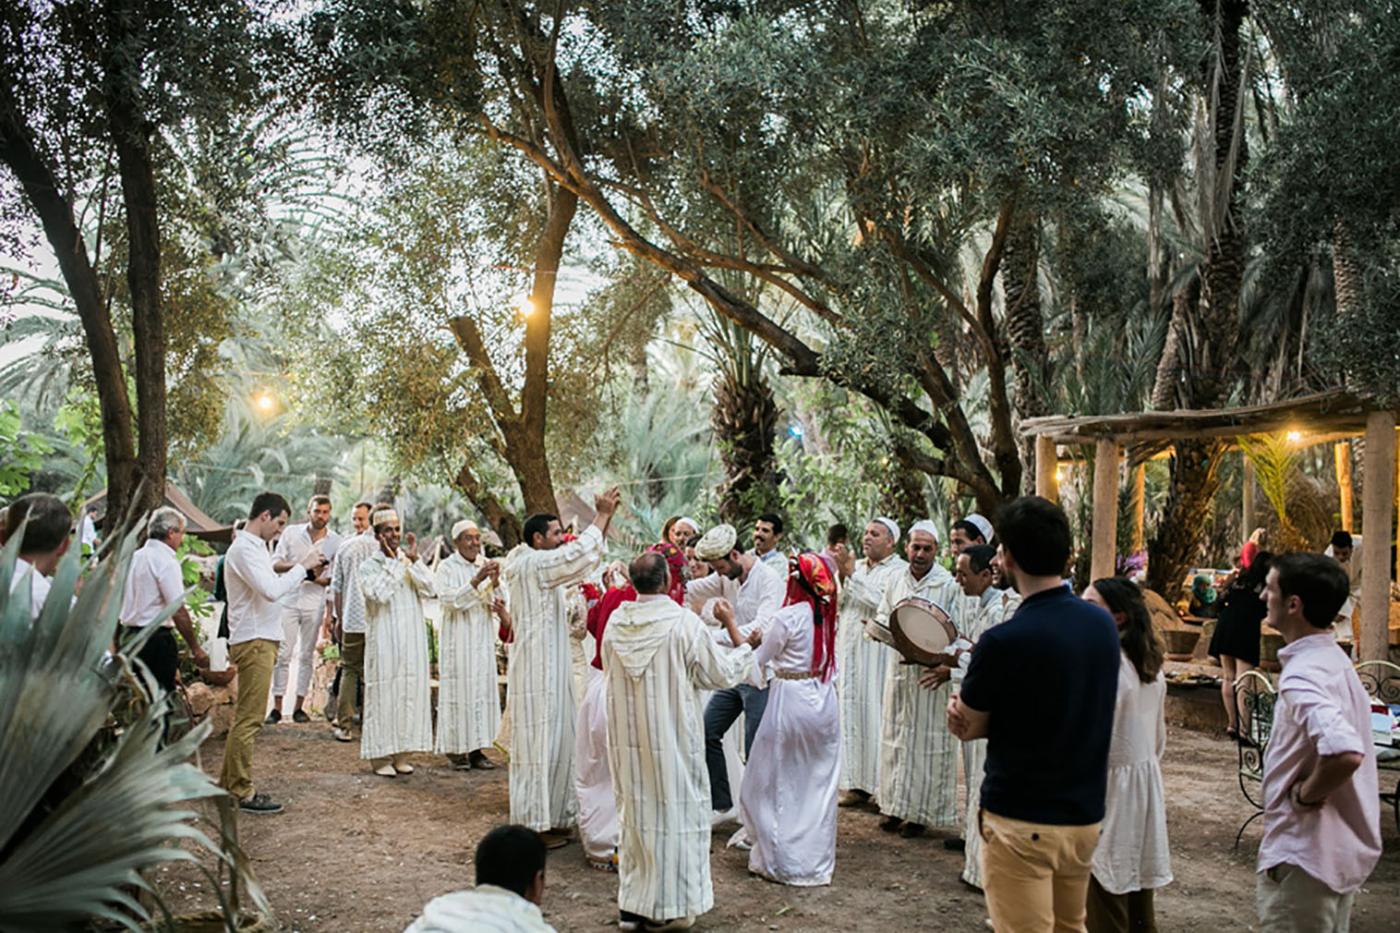 This Destination Jungle Wedding To Morrocco Could Not Have Been Any More Beautiful. 